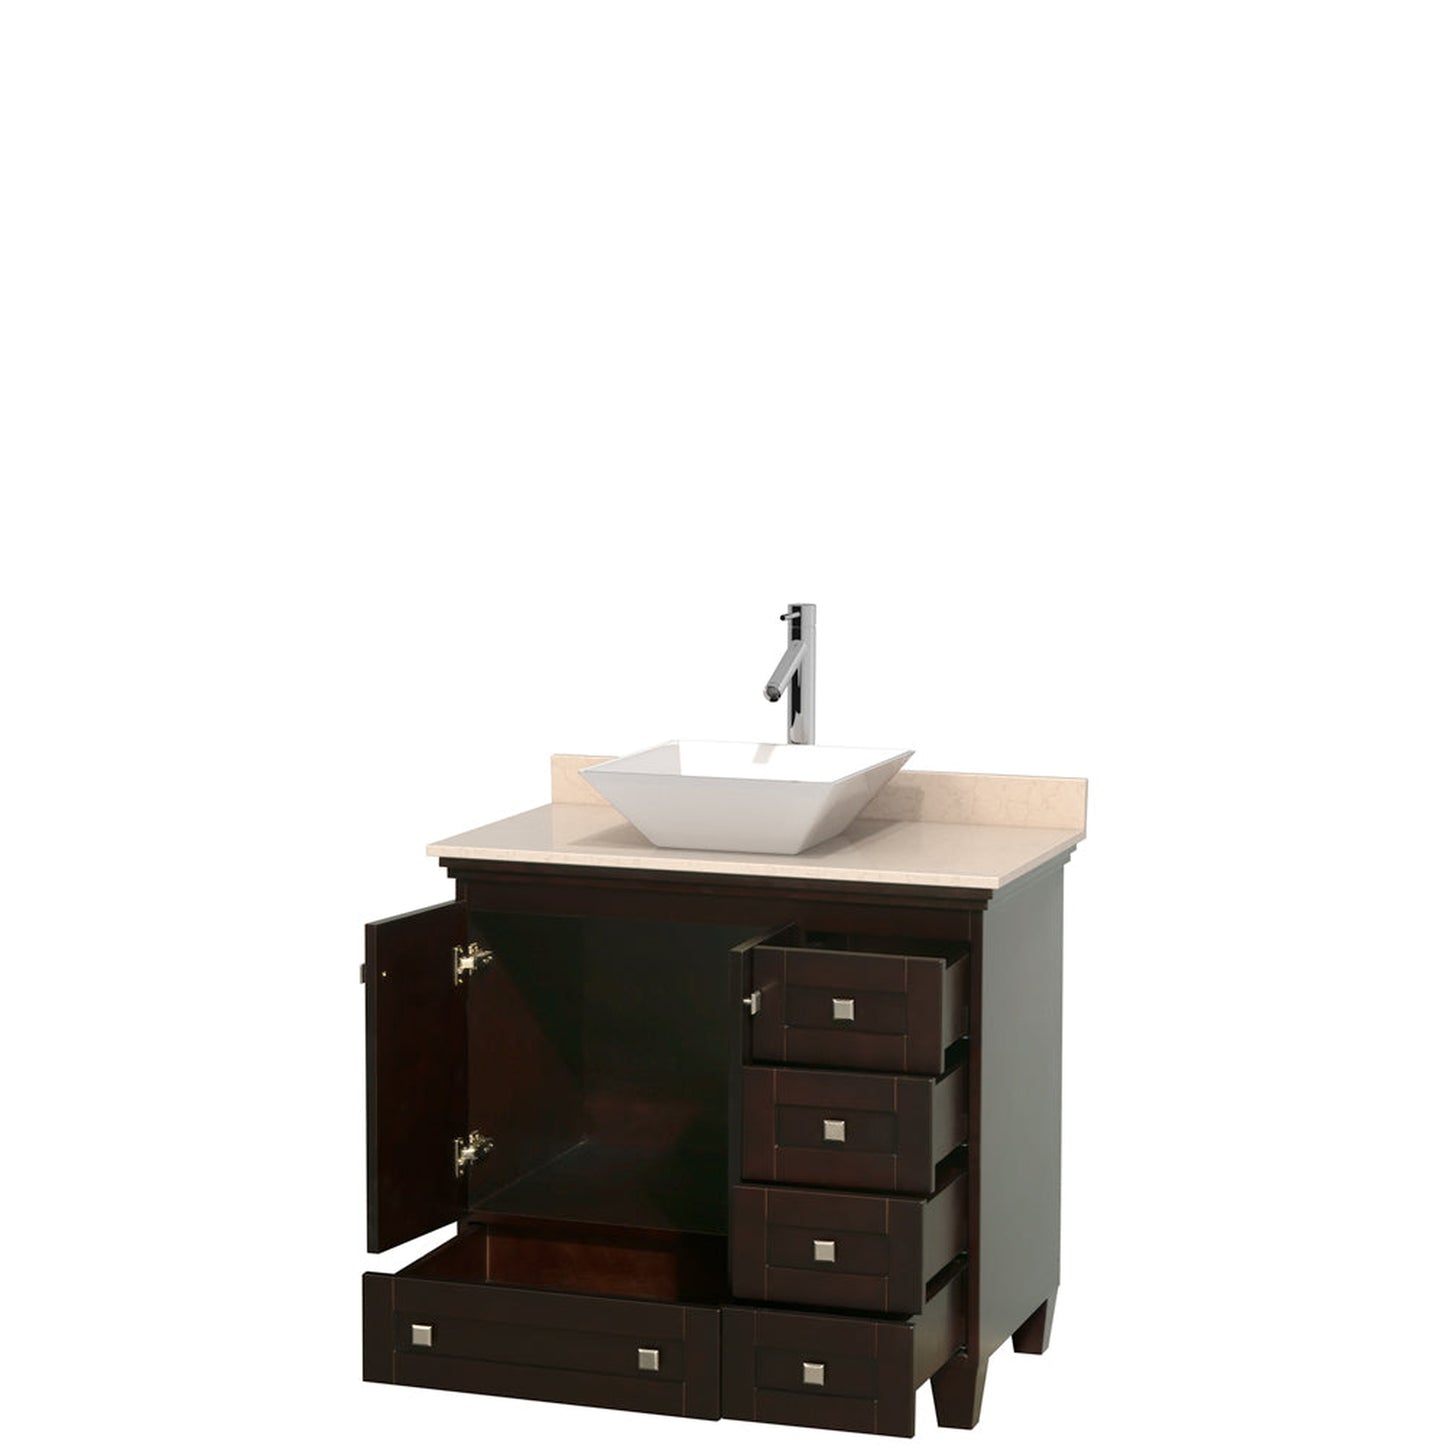 Wyndham Collection Acclaim 36" Single Bathroom Vanity in Espresso With Ivory Marble Countertop & Pyra White Porcelain Sink